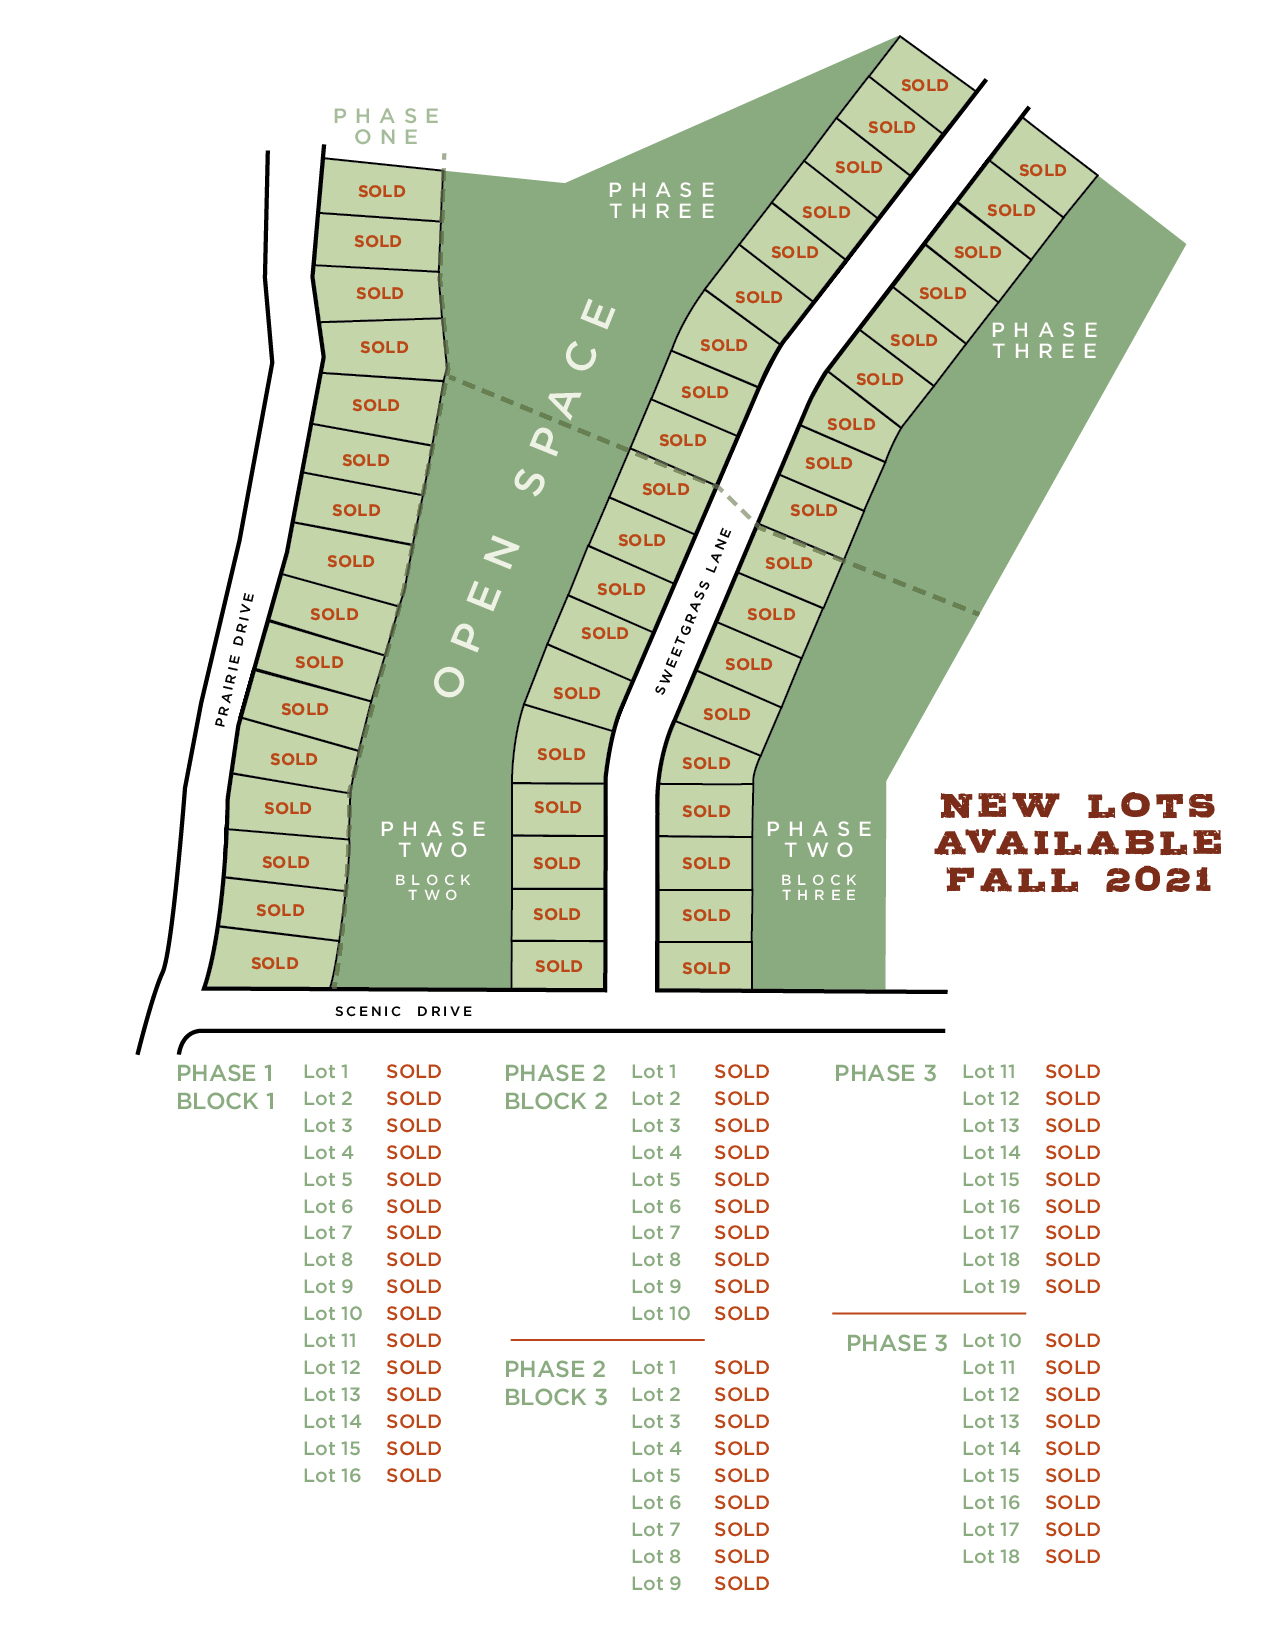 NorthTown Phase map 4-22-12